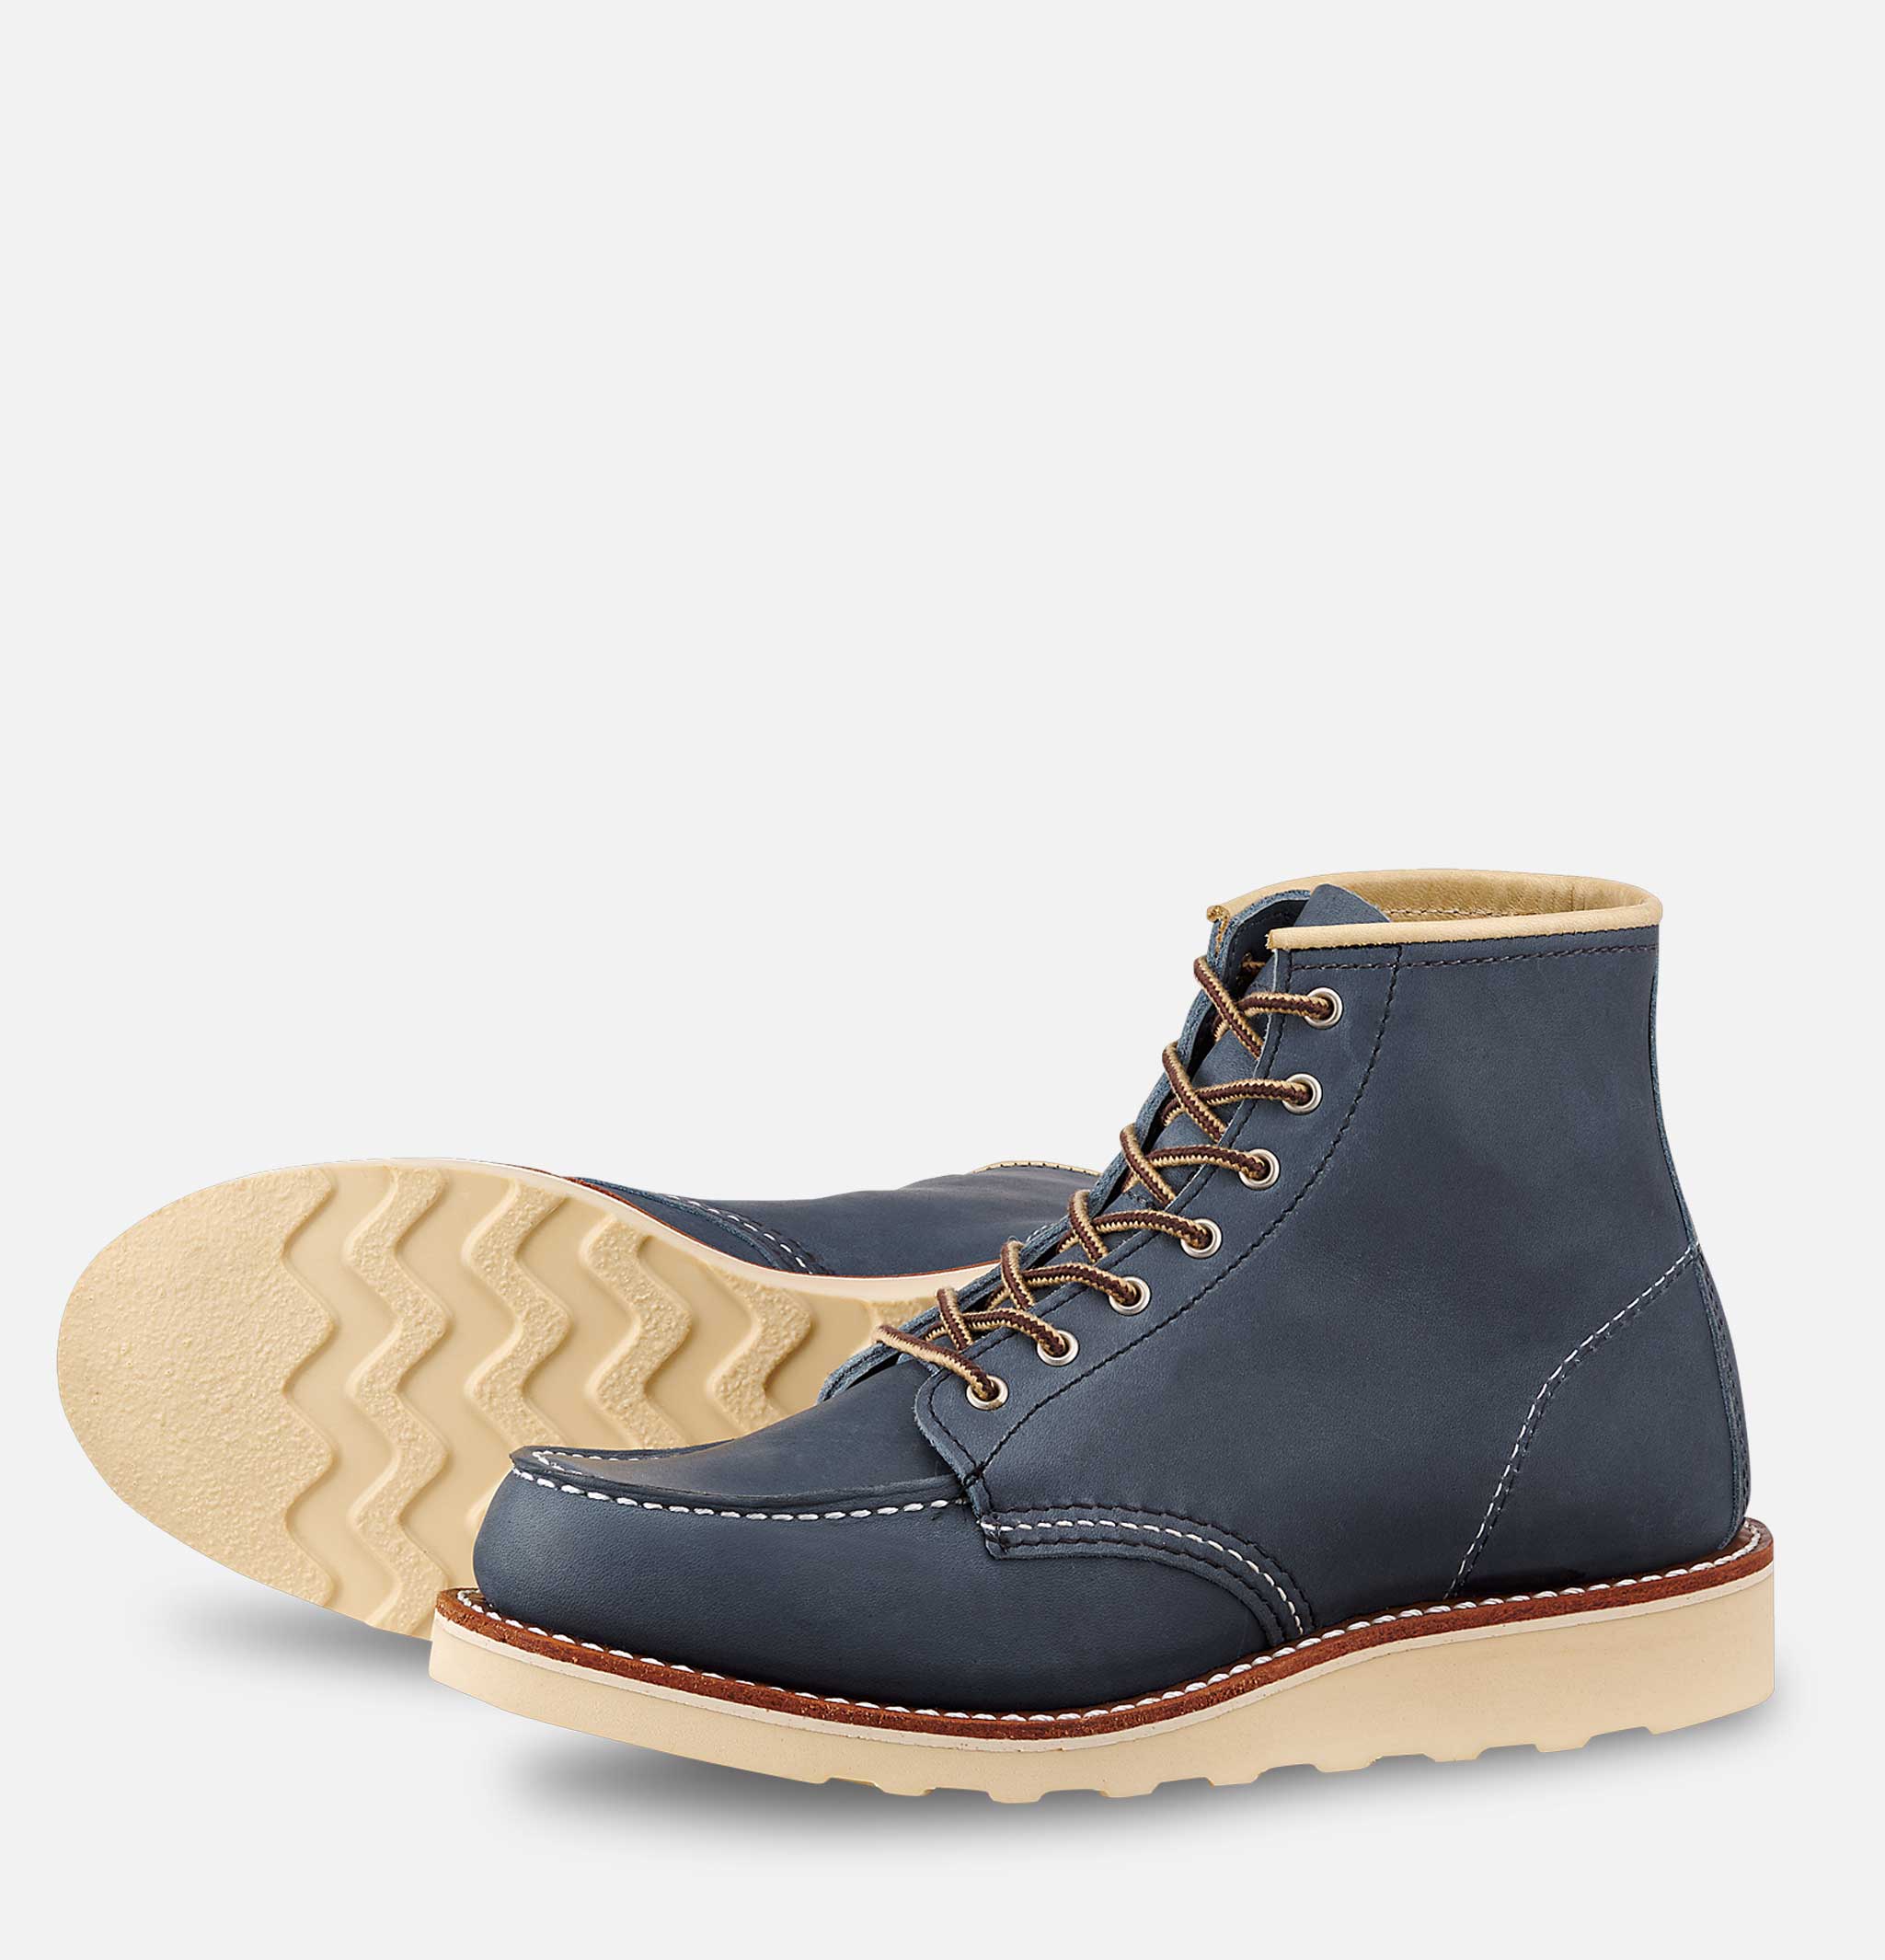 Red Wing Shoes - woman - 3353 - Moc Toe Indigo